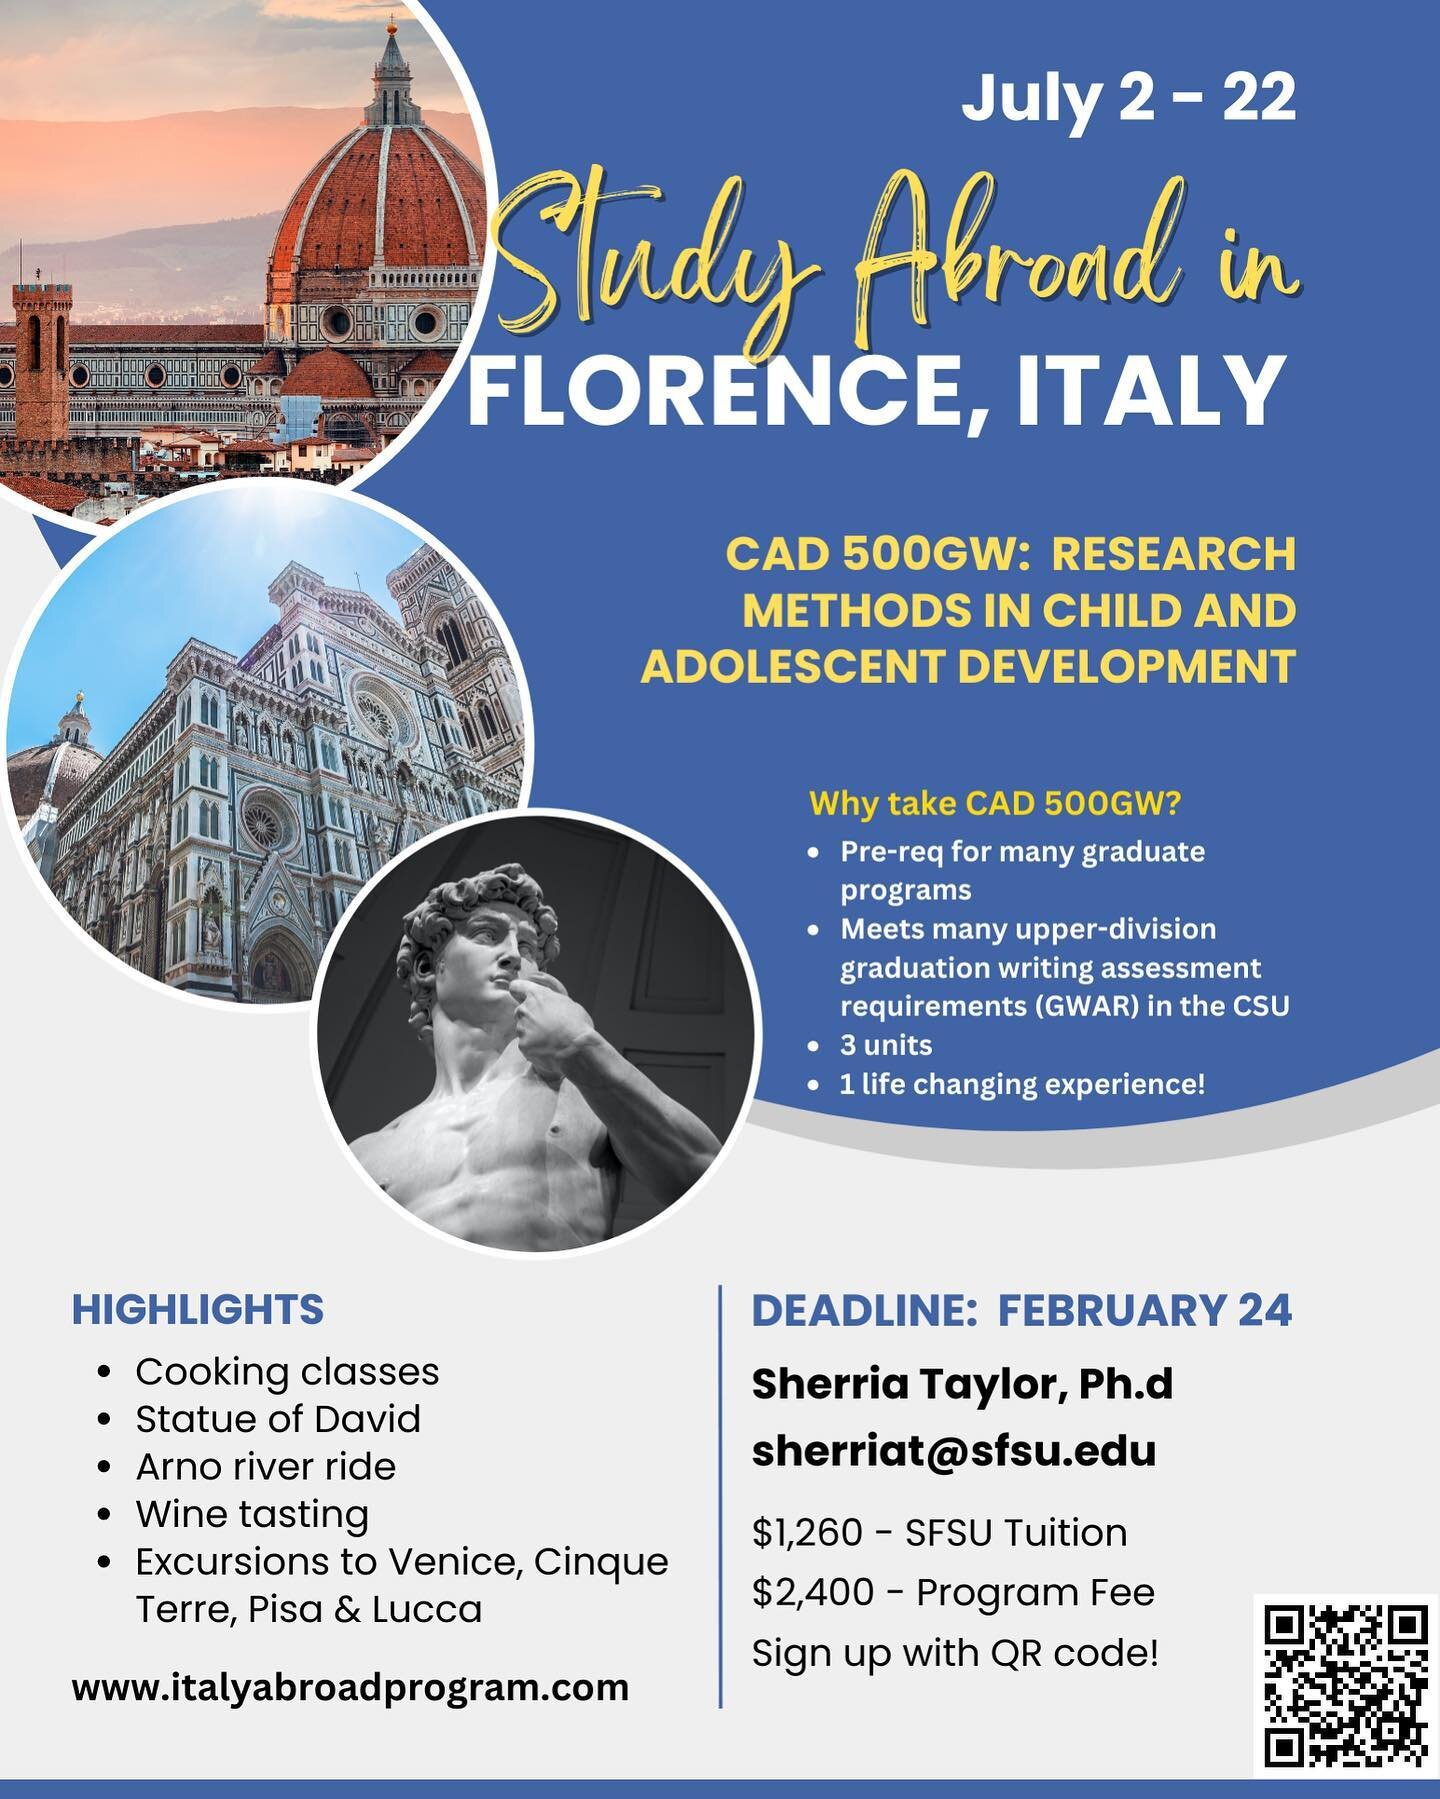 Child Development course in Florence, Italy!🇮🇹🇮🇹

Deadline: February 24